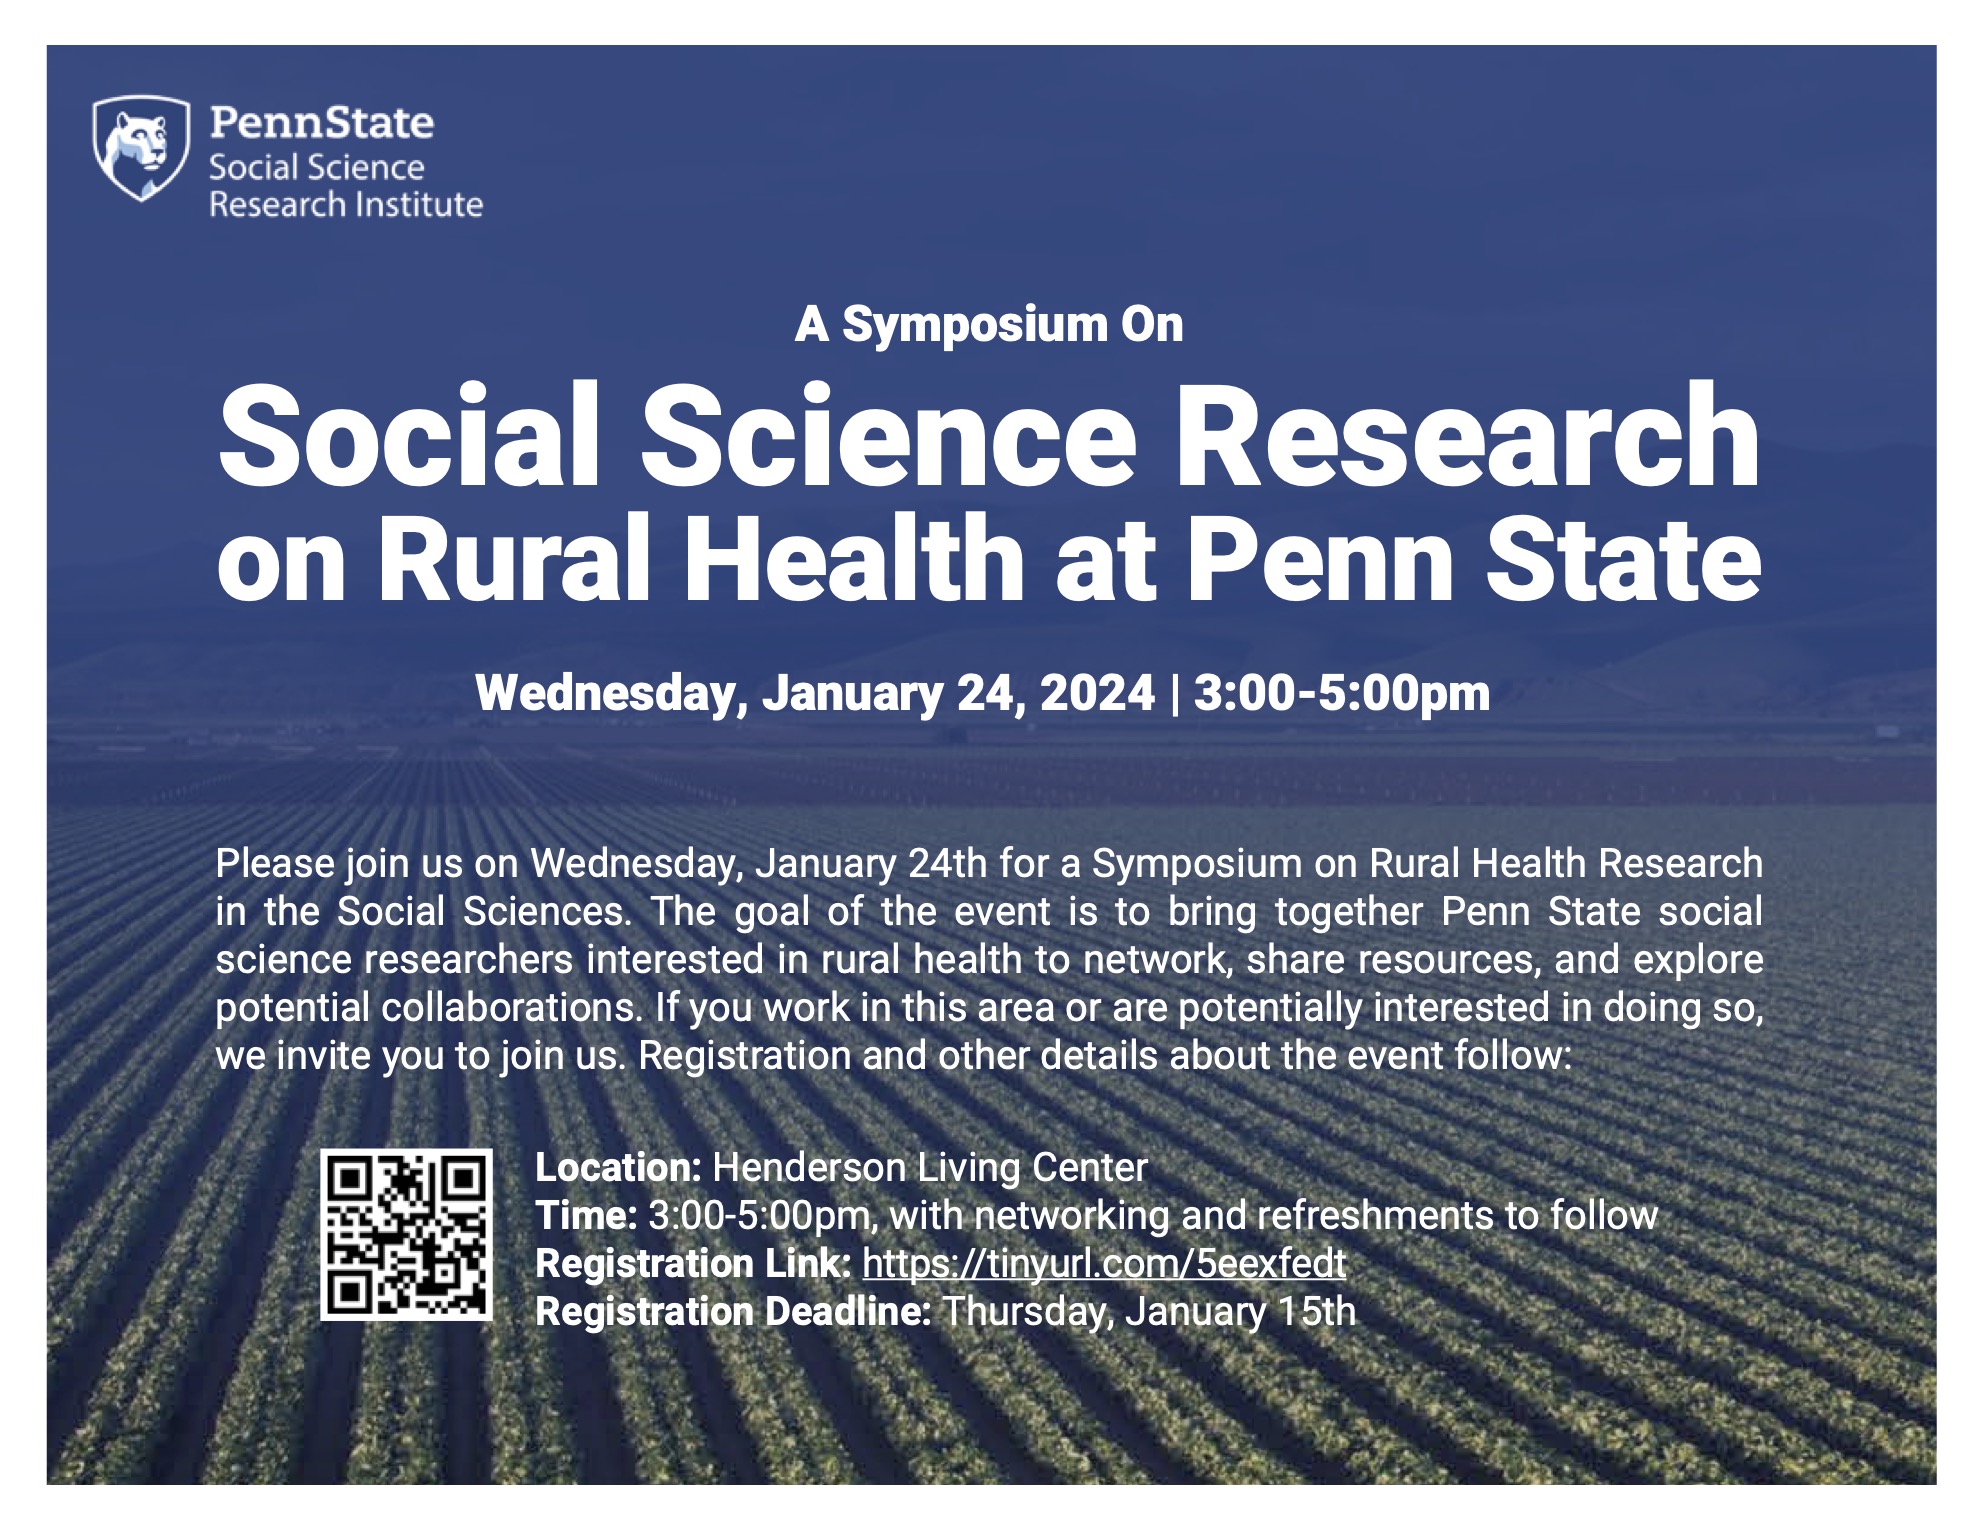 Social Science Research on Rural Health